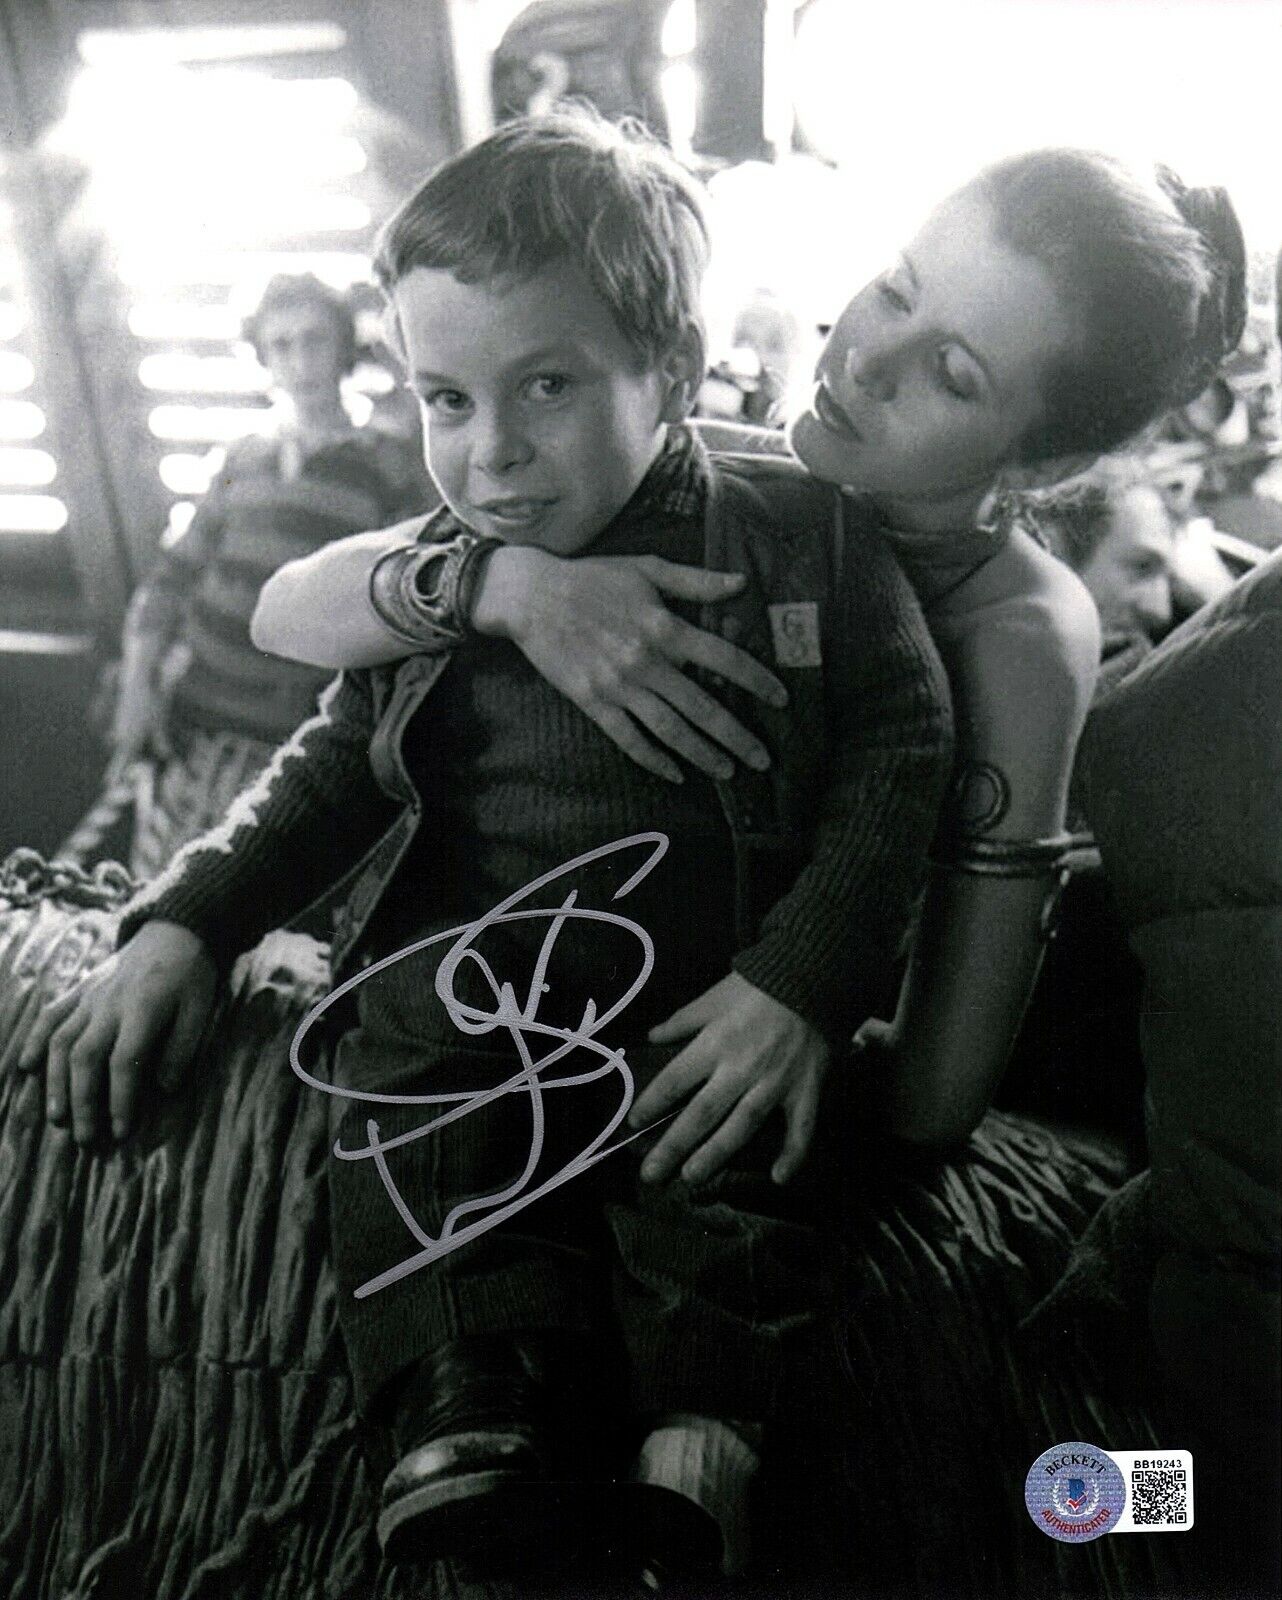 WARWICK DAVIS w/ Leia Signed Autographed Star Wars 8x10 Photo Poster painting BECKETT BAS